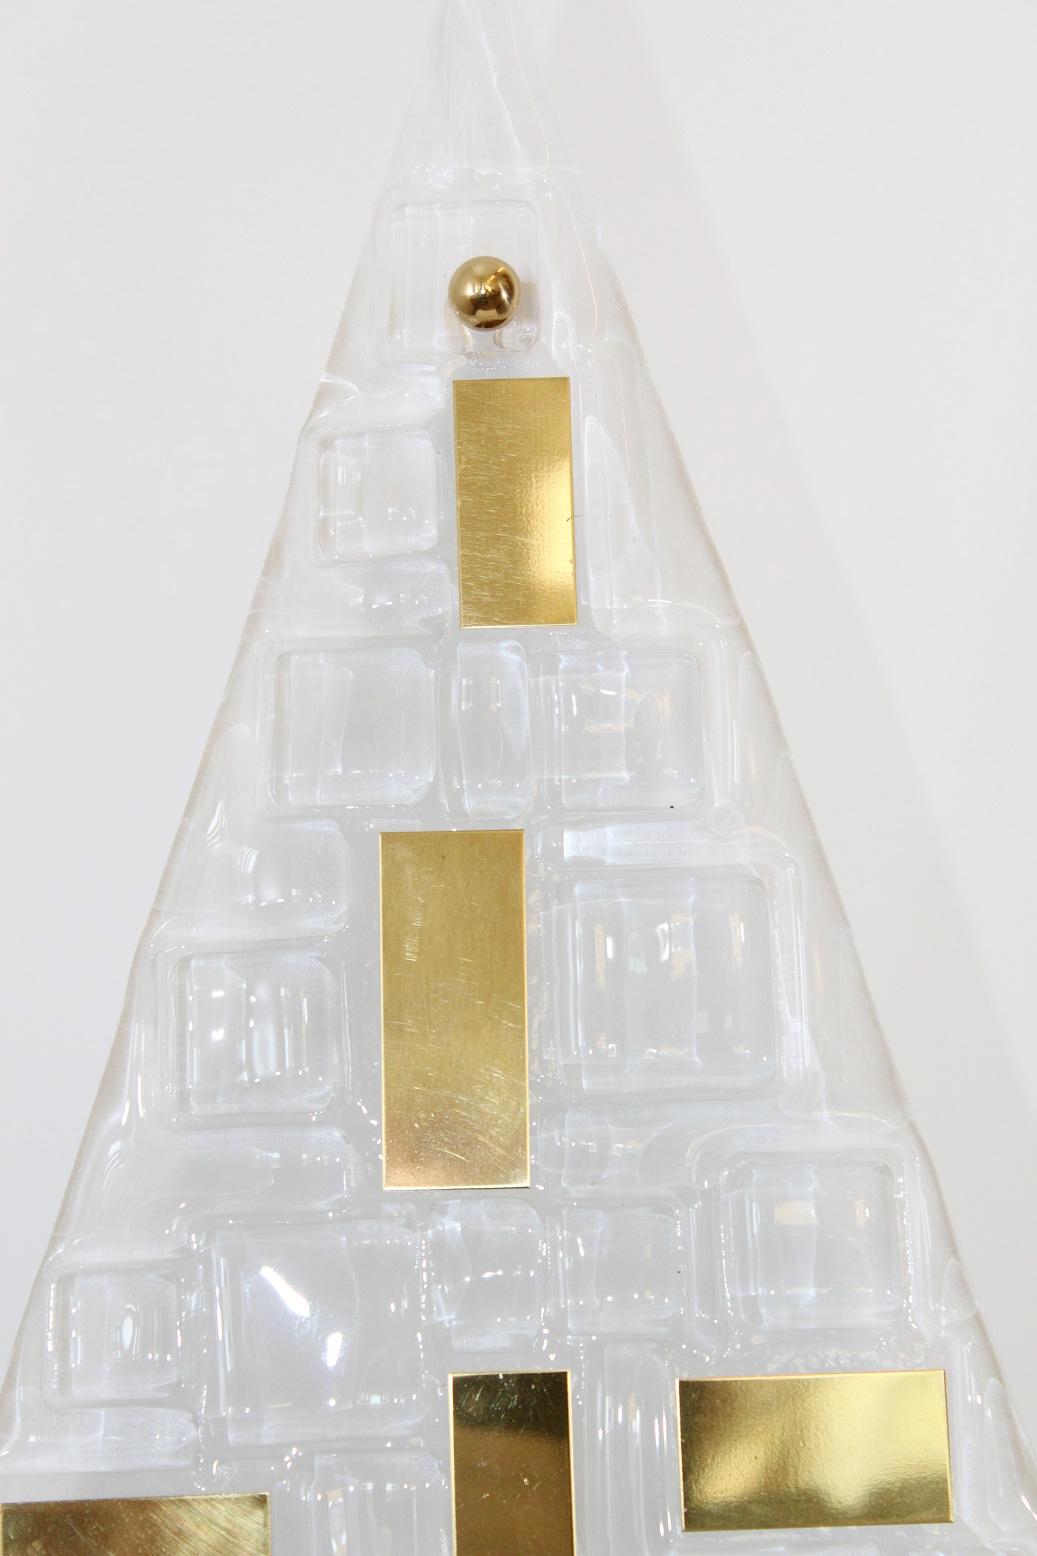 Limited edition Italian modern wall lights or flush mounts with frosted triangular textured Murano glasses decorated with brass details / Exclusively designed by Gianluca Fontana for Fabio Ltd / Made in Italy
2 lights / E12 or E14 type / max 40W